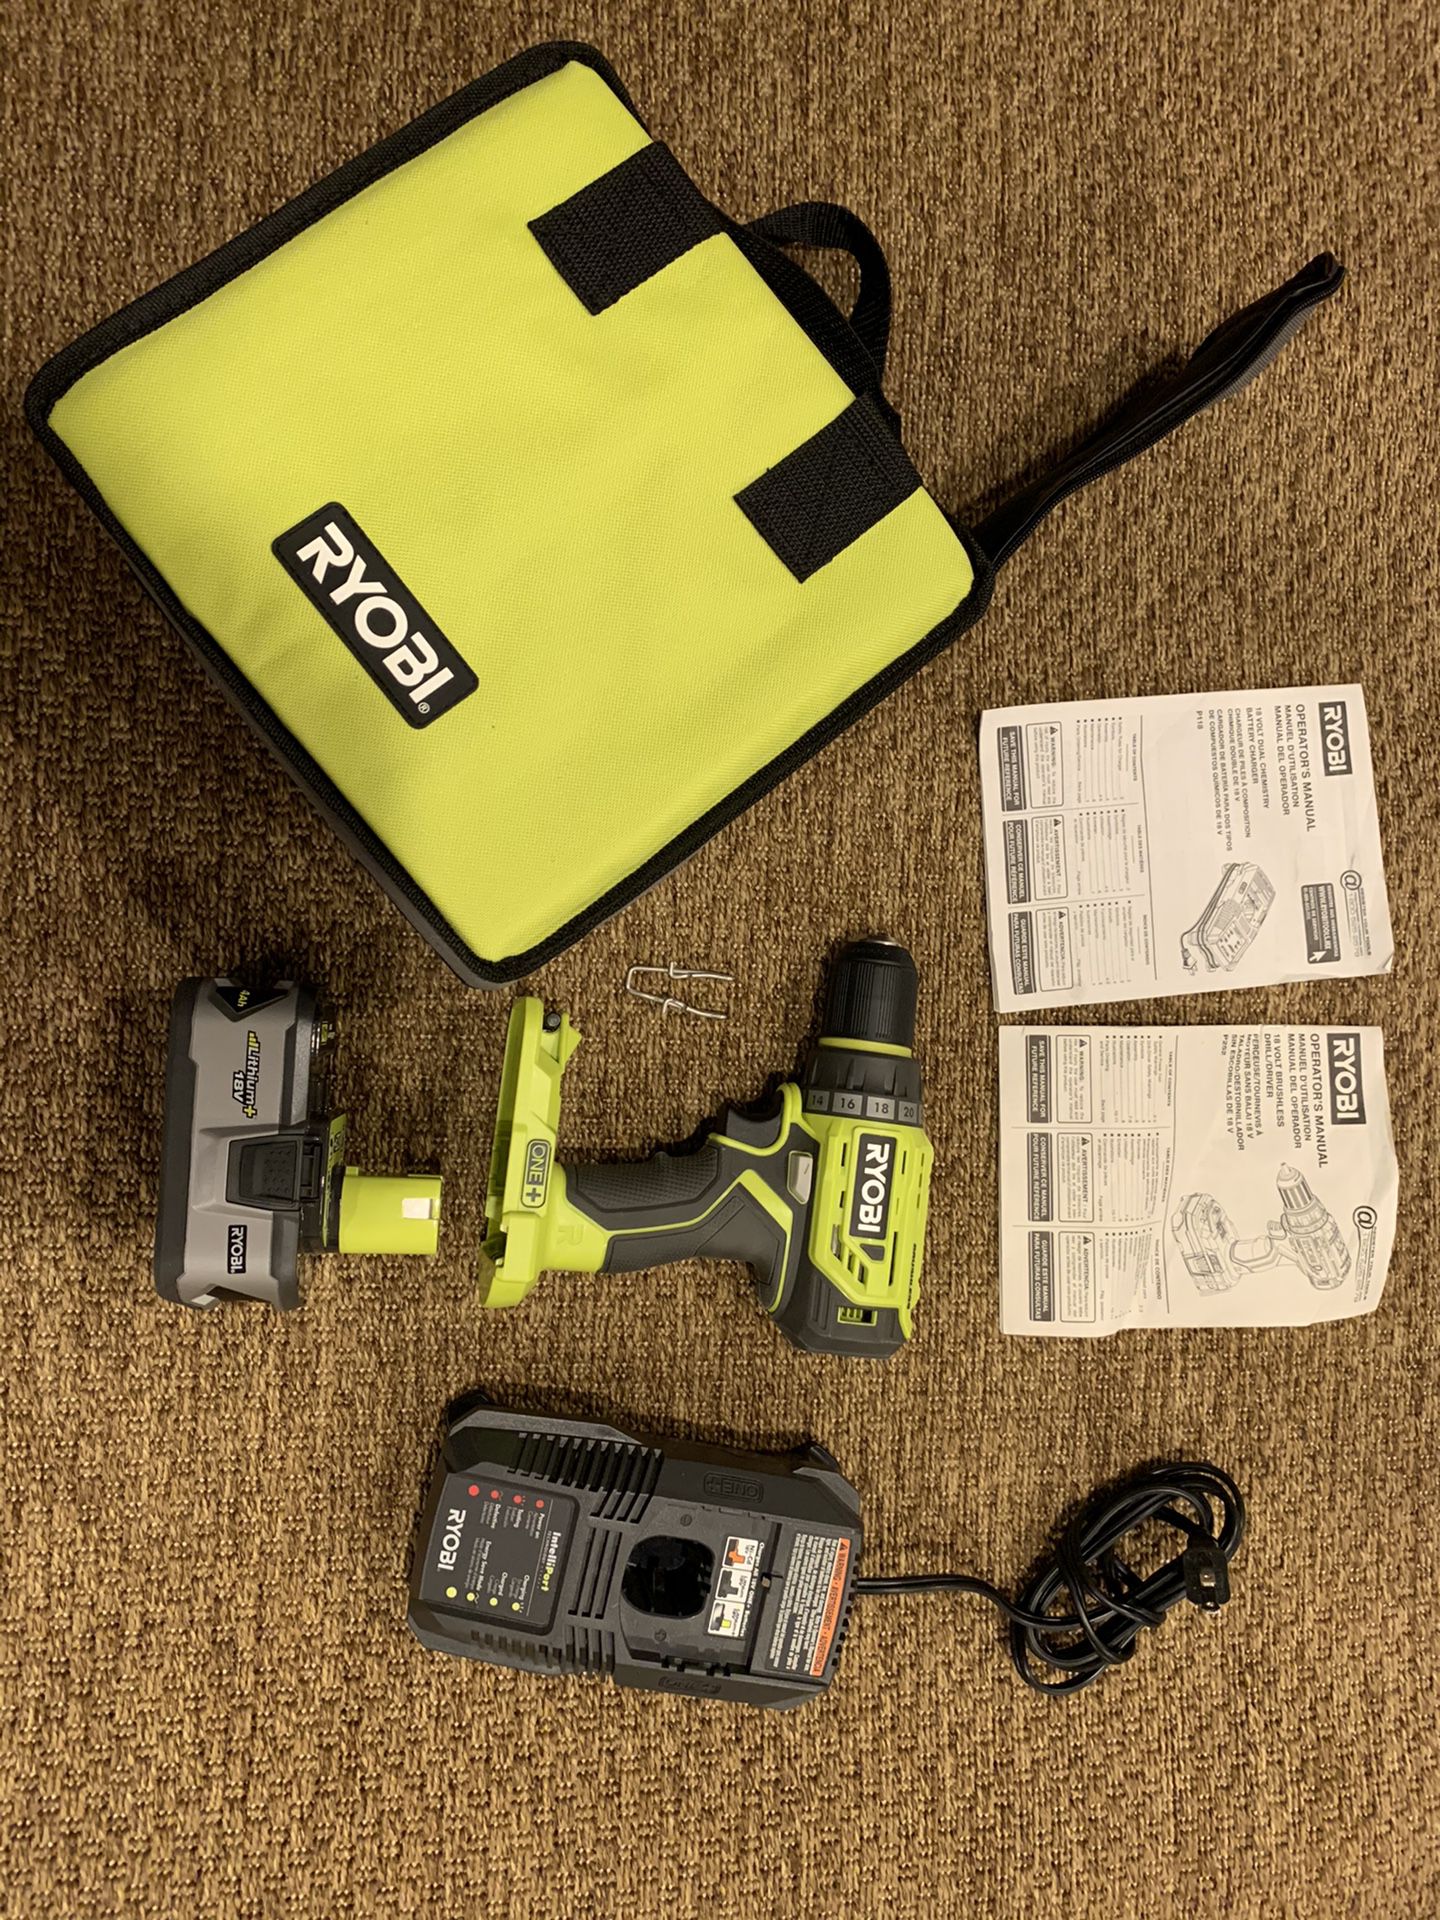 Ryobi P252 Brushless Drill/Driver with Bag, 4ah Battery and Charger